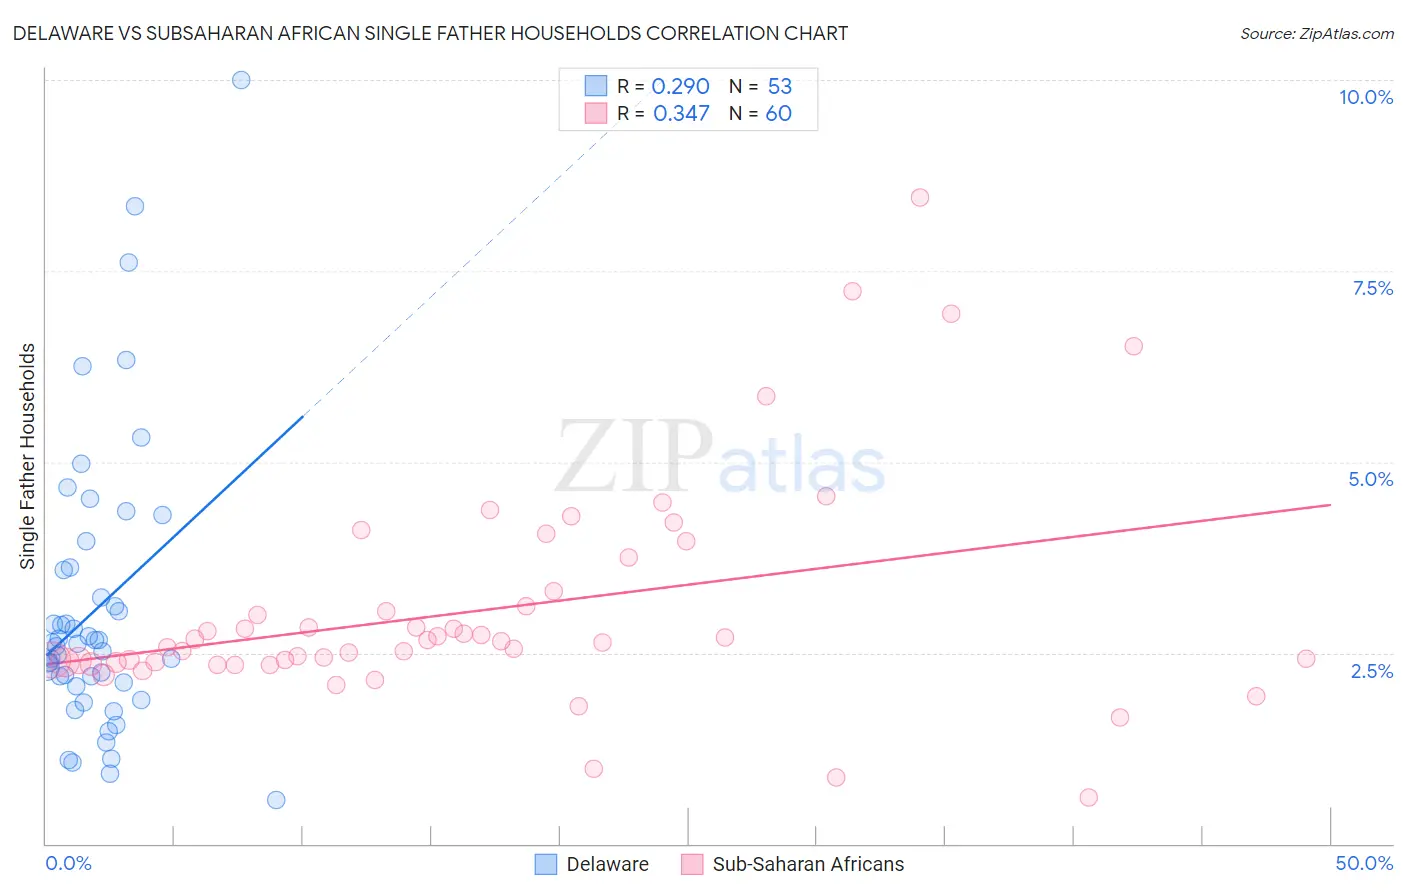 Delaware vs Subsaharan African Single Father Households